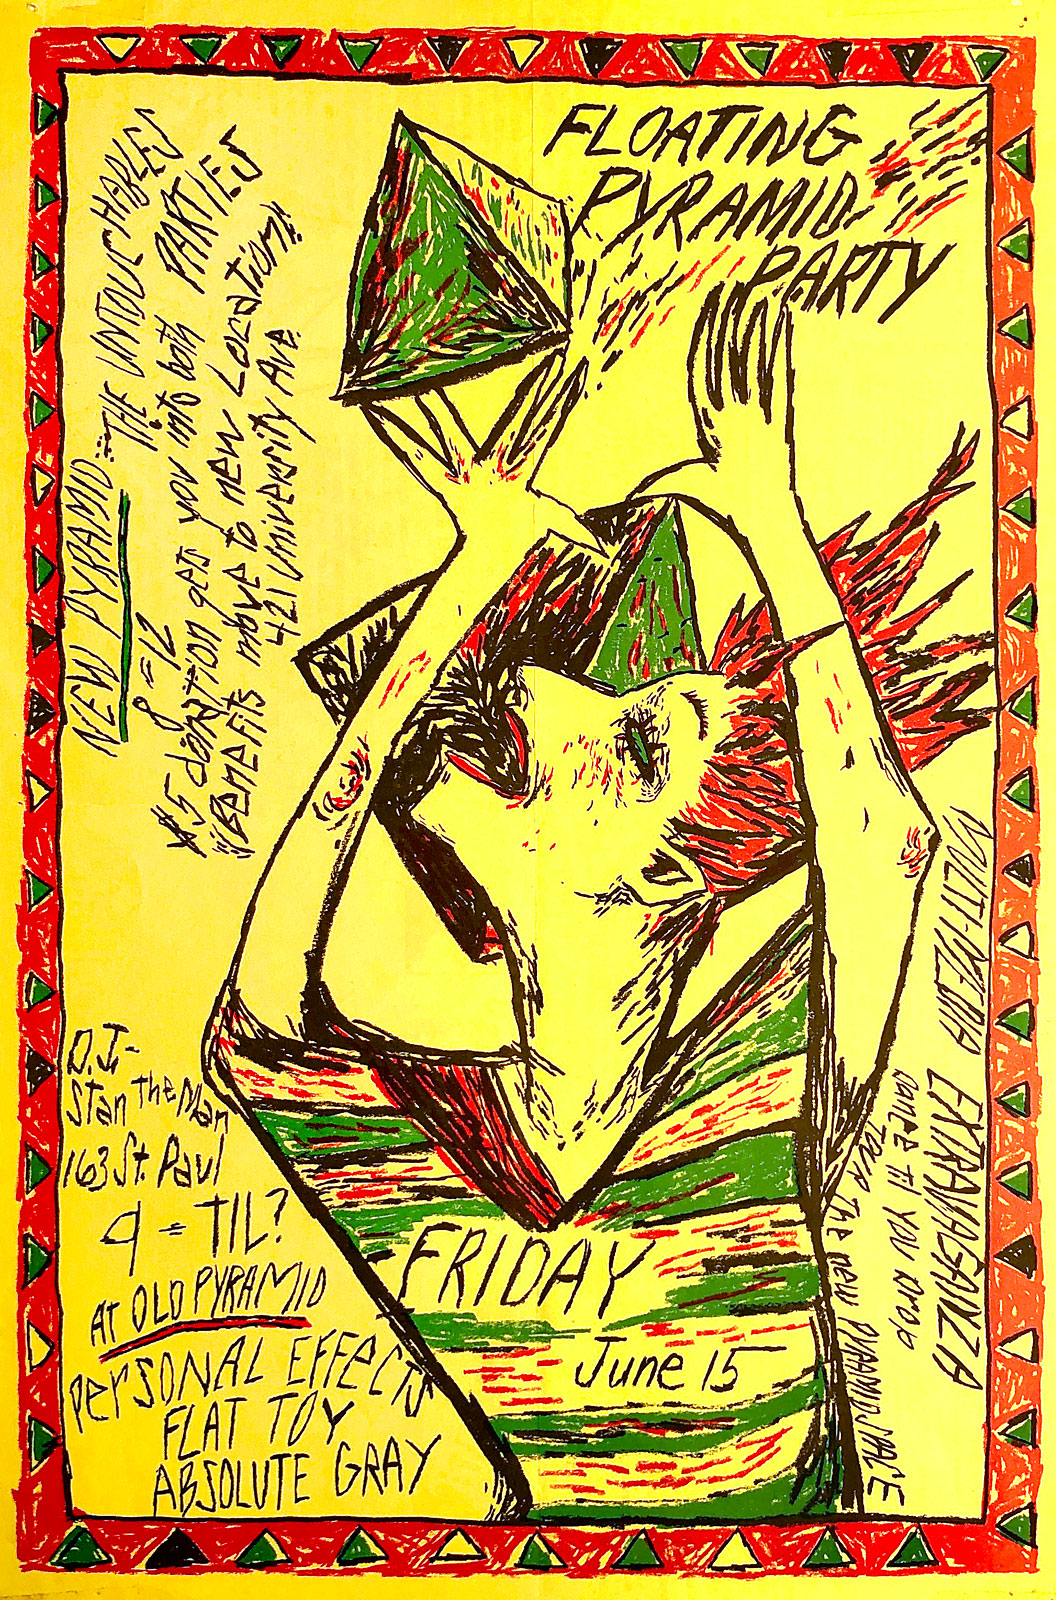 Poster for Personal Effects, Flat Toy and Absolute Grey at the Pyramid Art Center in Rochester, New York on 06.15.1984. Poster designed by Julianna Furlong Williams.